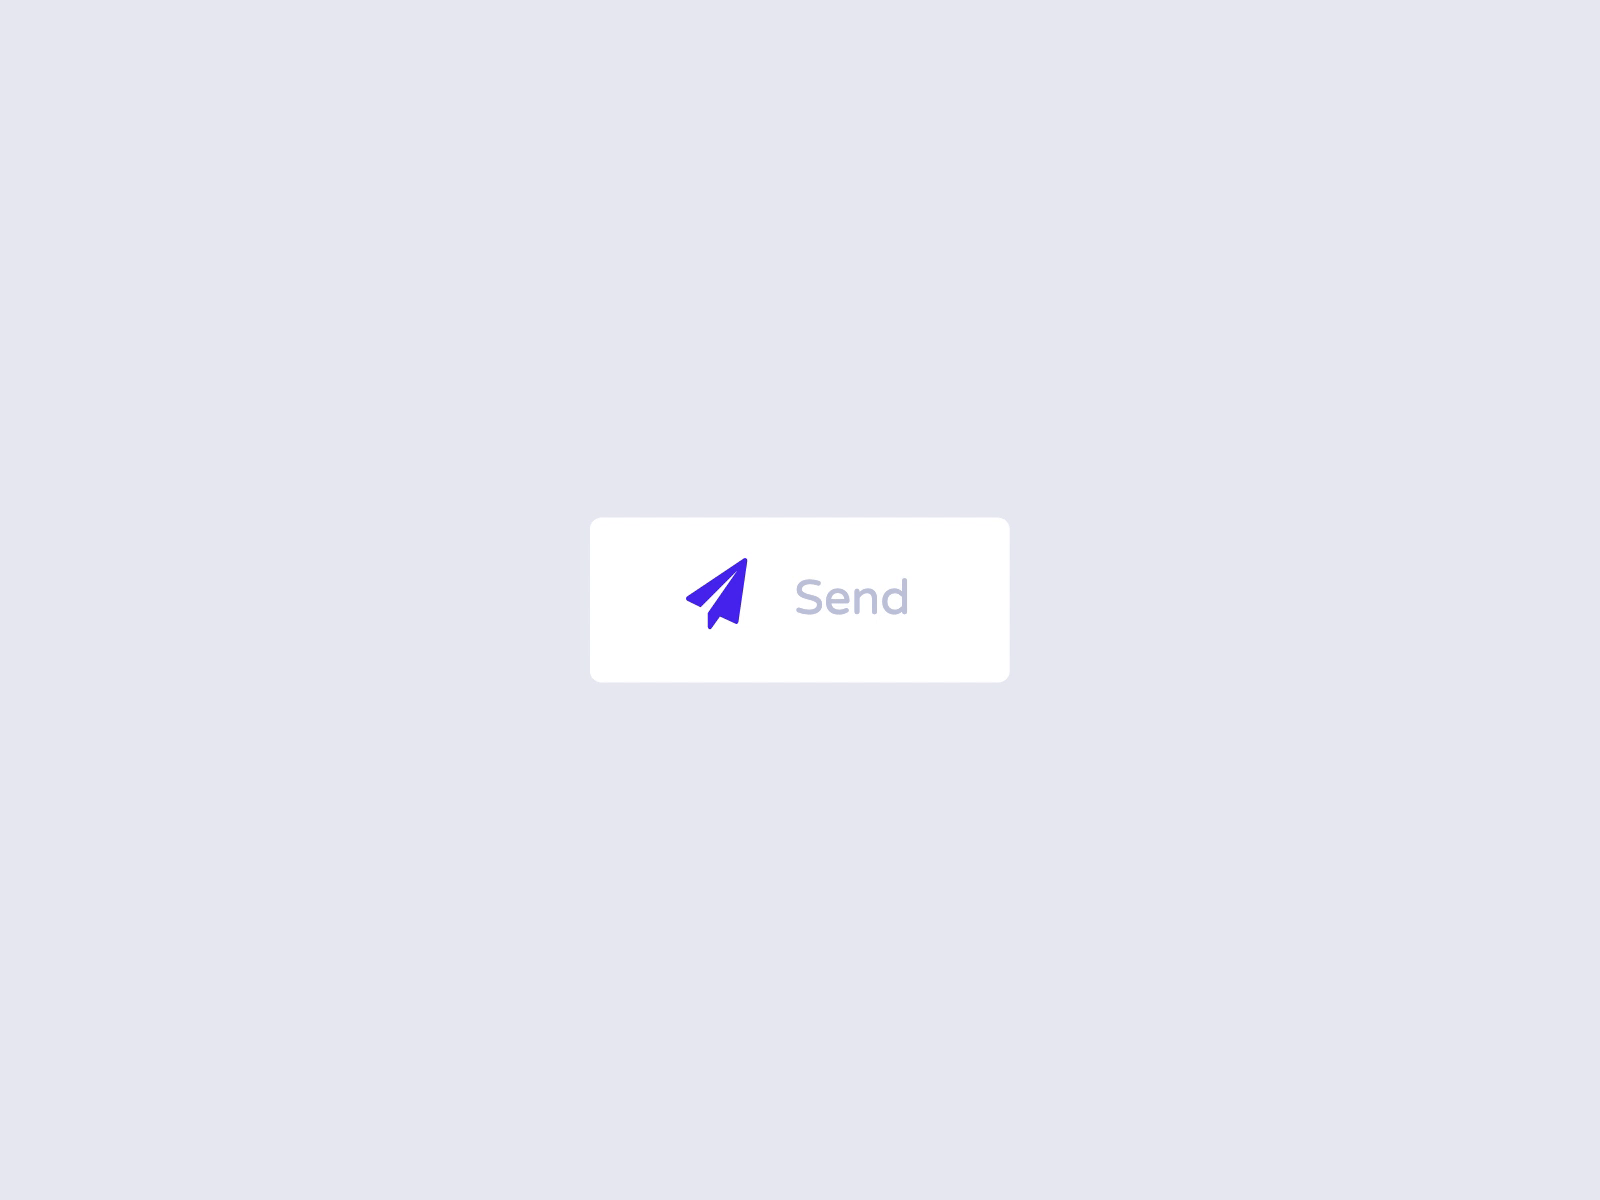 Send button animation - CodePen by Milan Raring on Dribbble